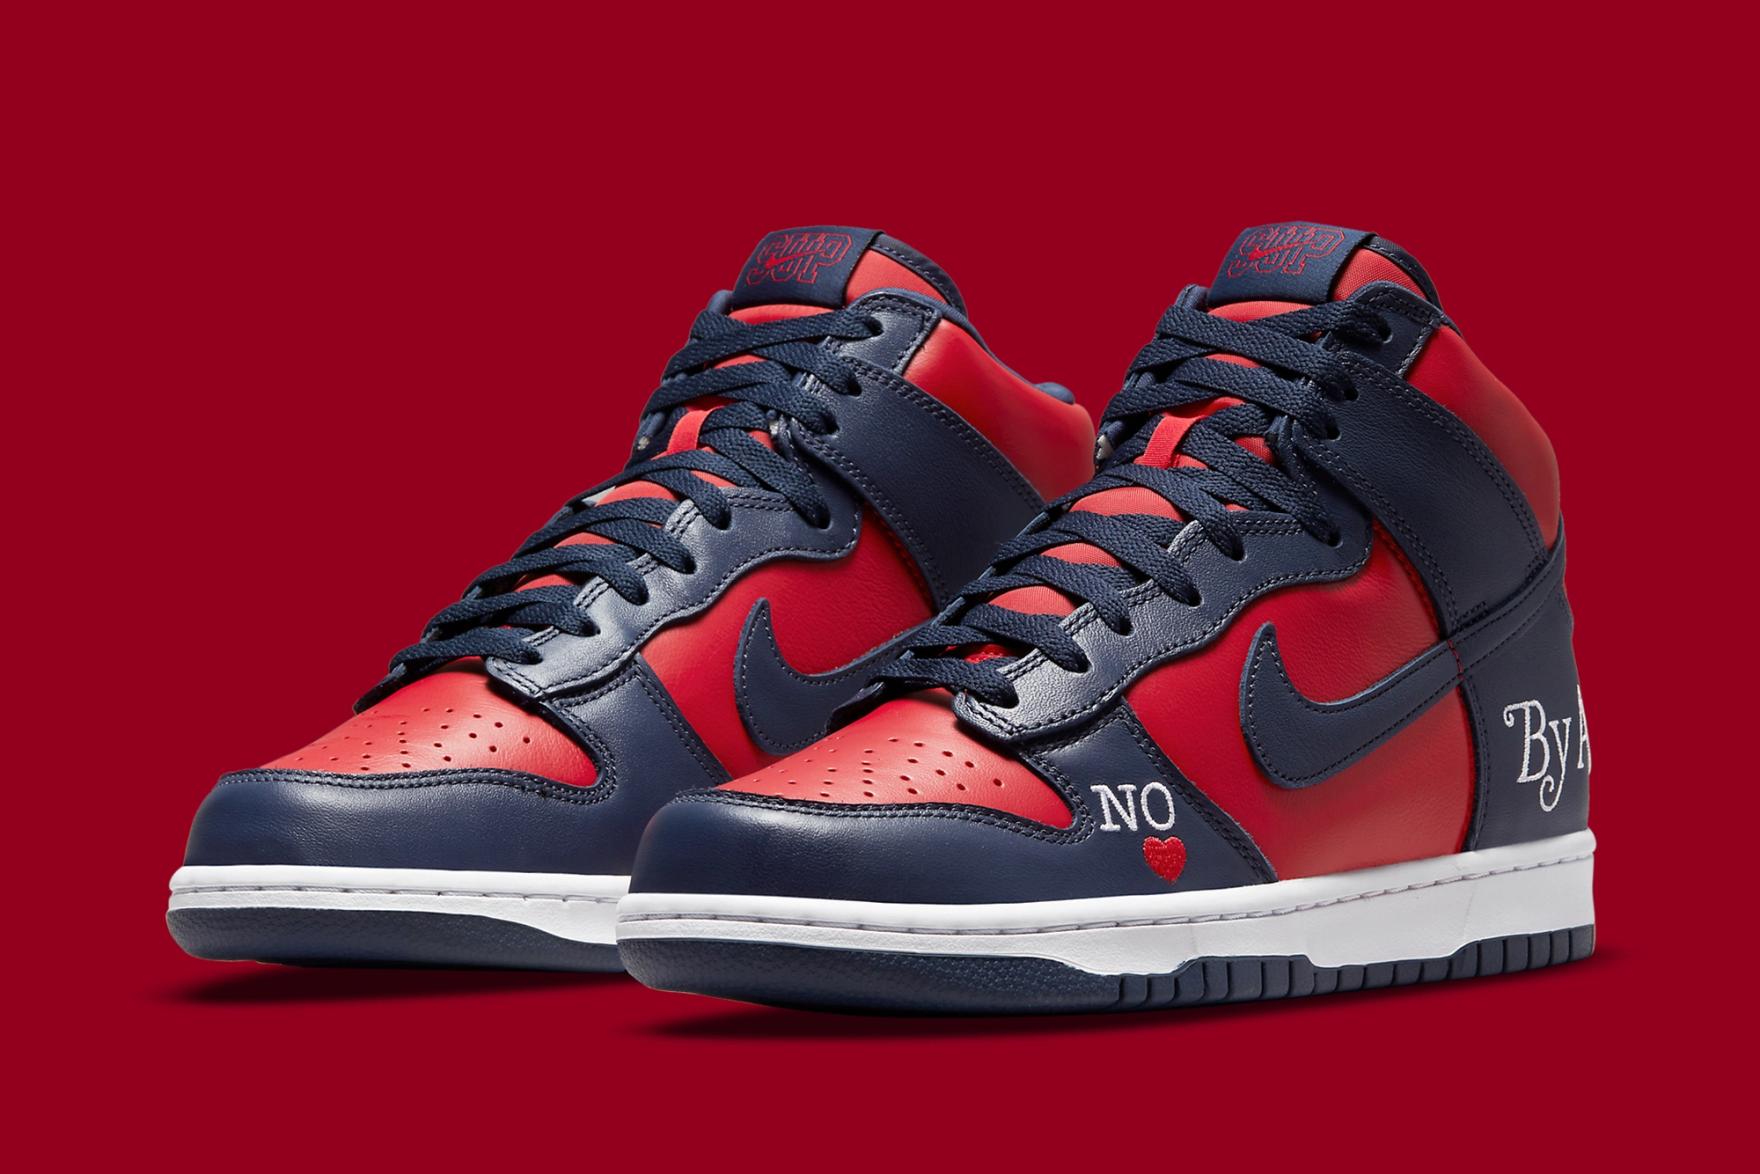 Supreme x Nike SB Dunk High 'By Any Means' in Navy/Red